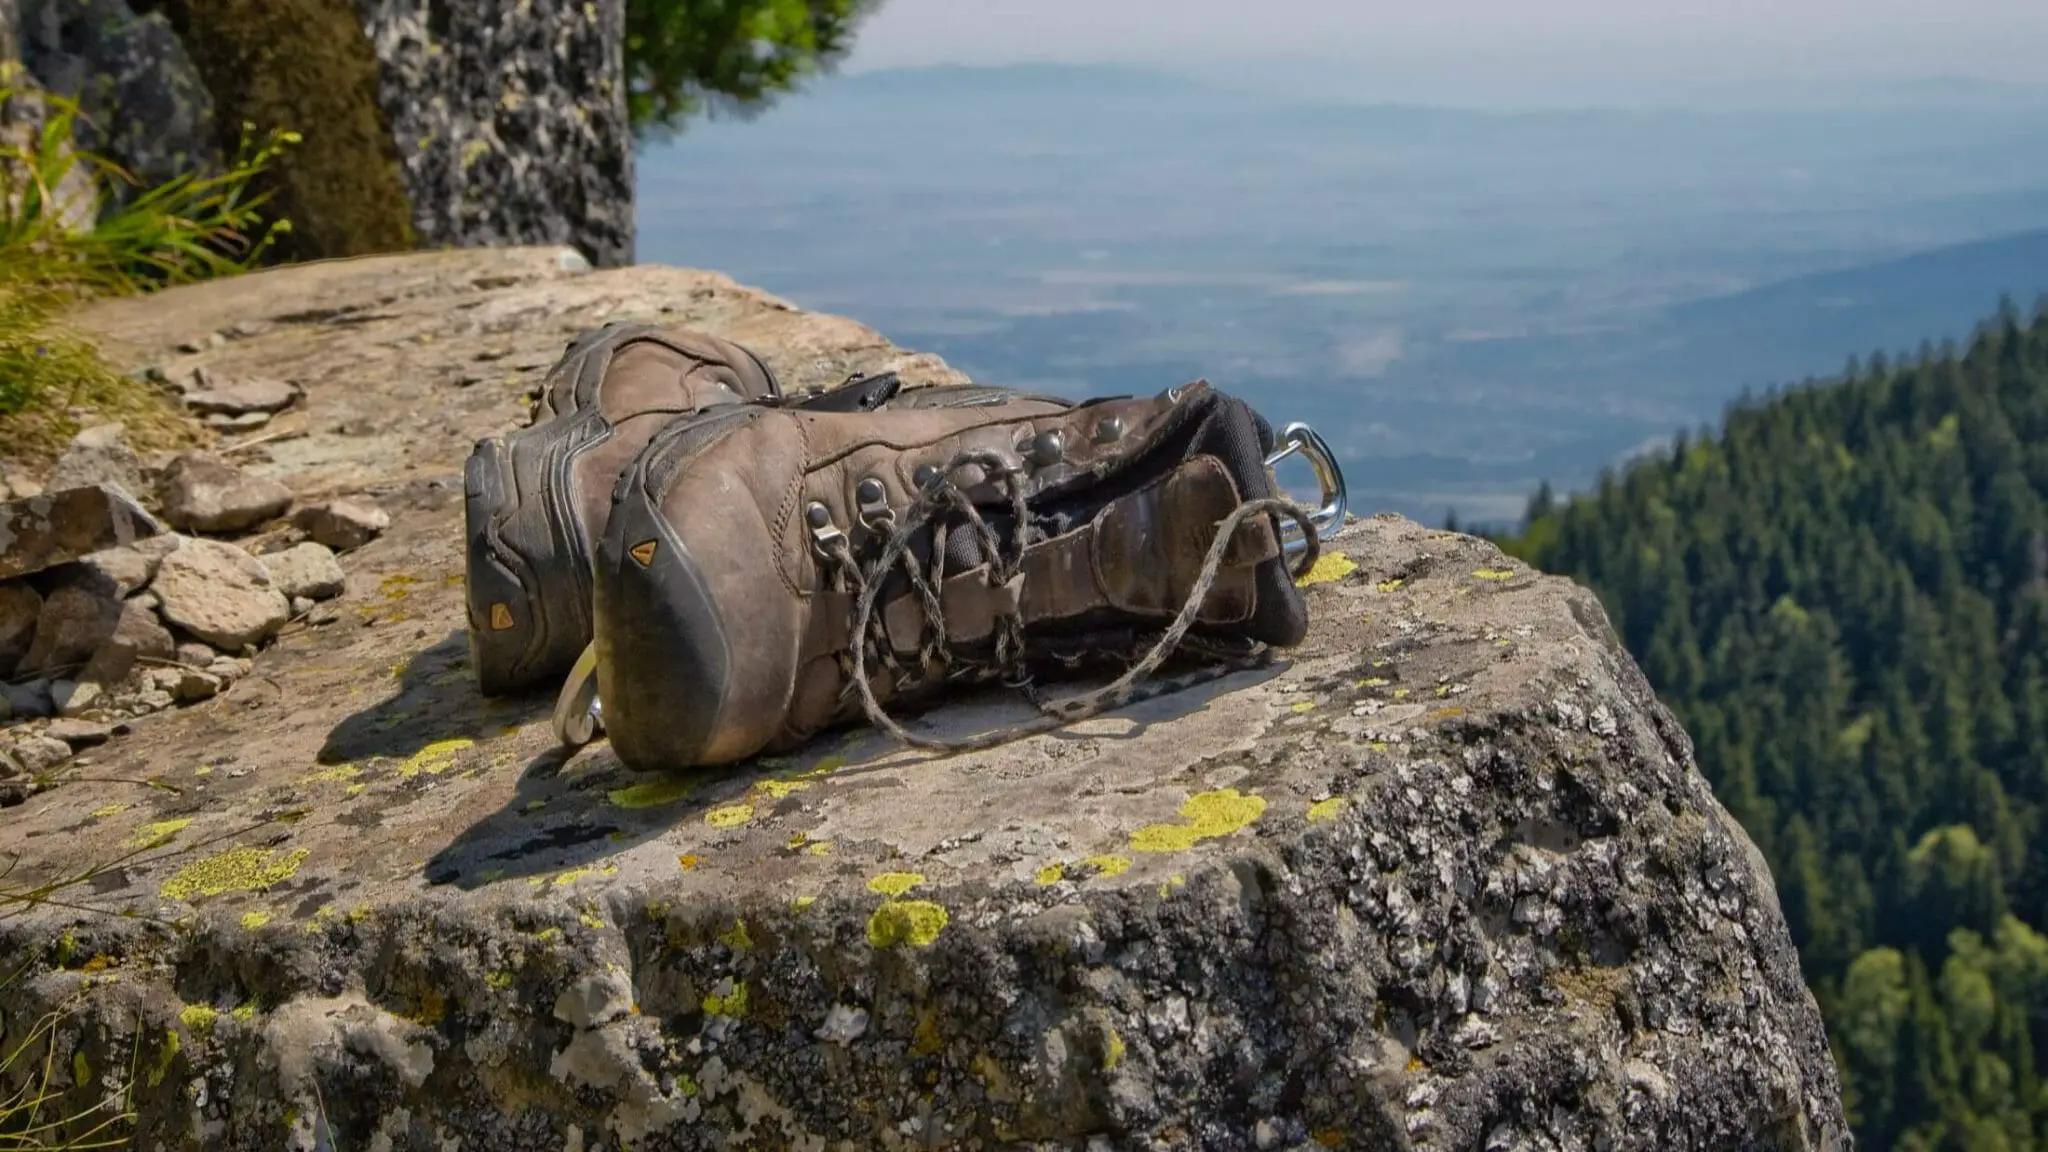 Pair of safety hiking boots sitting on their side on a rock with forest below and in the background.